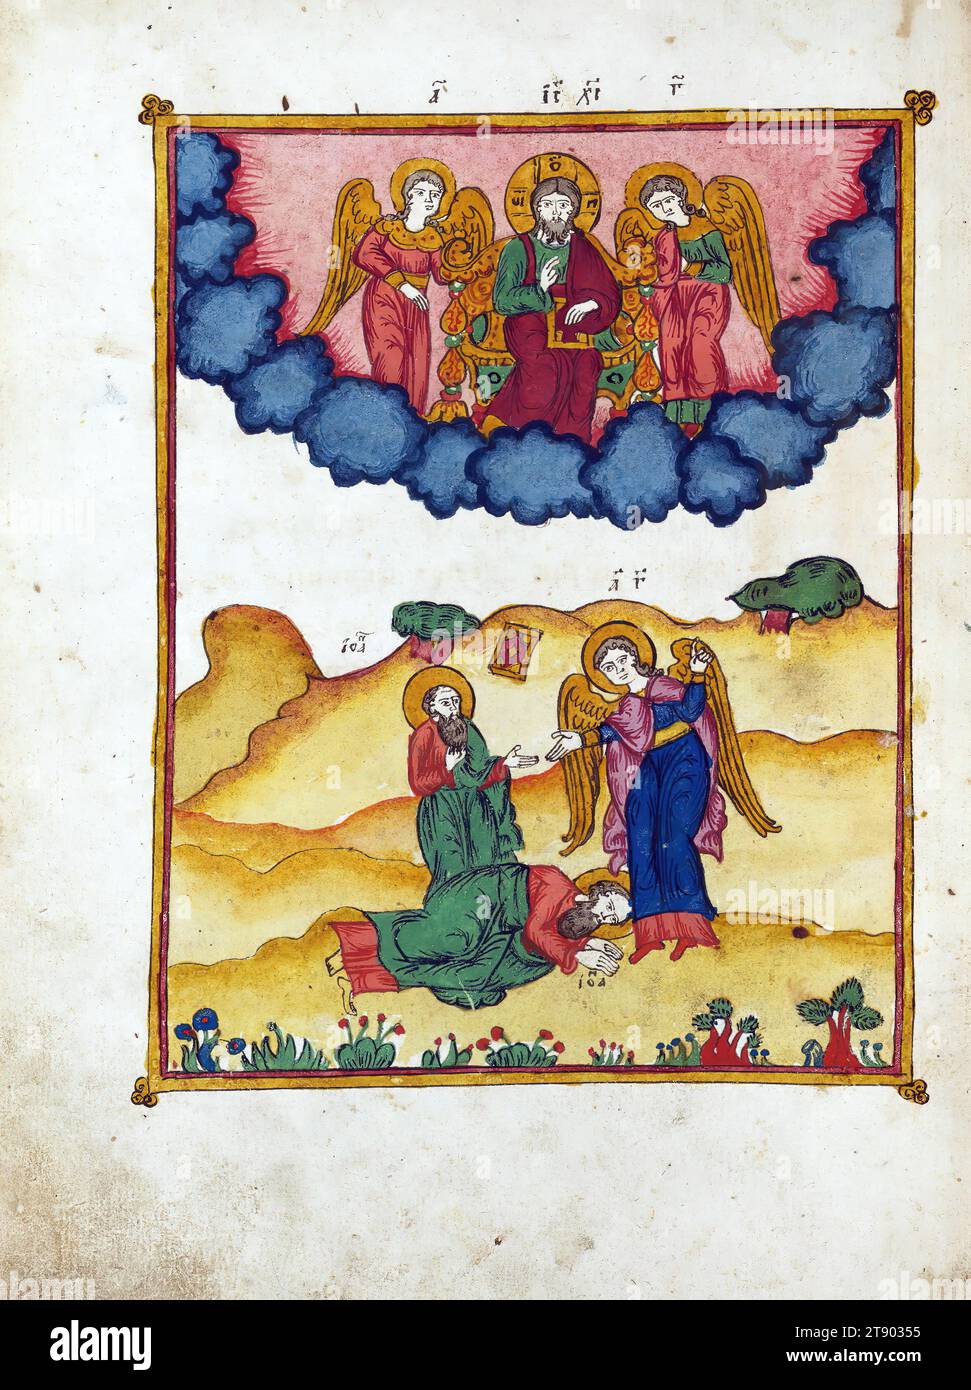 Apocalypse with Patristic commentary, St. John falls to the ground before the angel of his vision, This manuscript was made around 1800 by the 'Old Believers,' a group of Russian Christians who dissented from the Russian Orthodox Church and were subsequently persecuted and excommunicated. Because their books were often confiscated and they were forbidden to use printing presses, they continued to write important works such as this one by hand Stock Photo